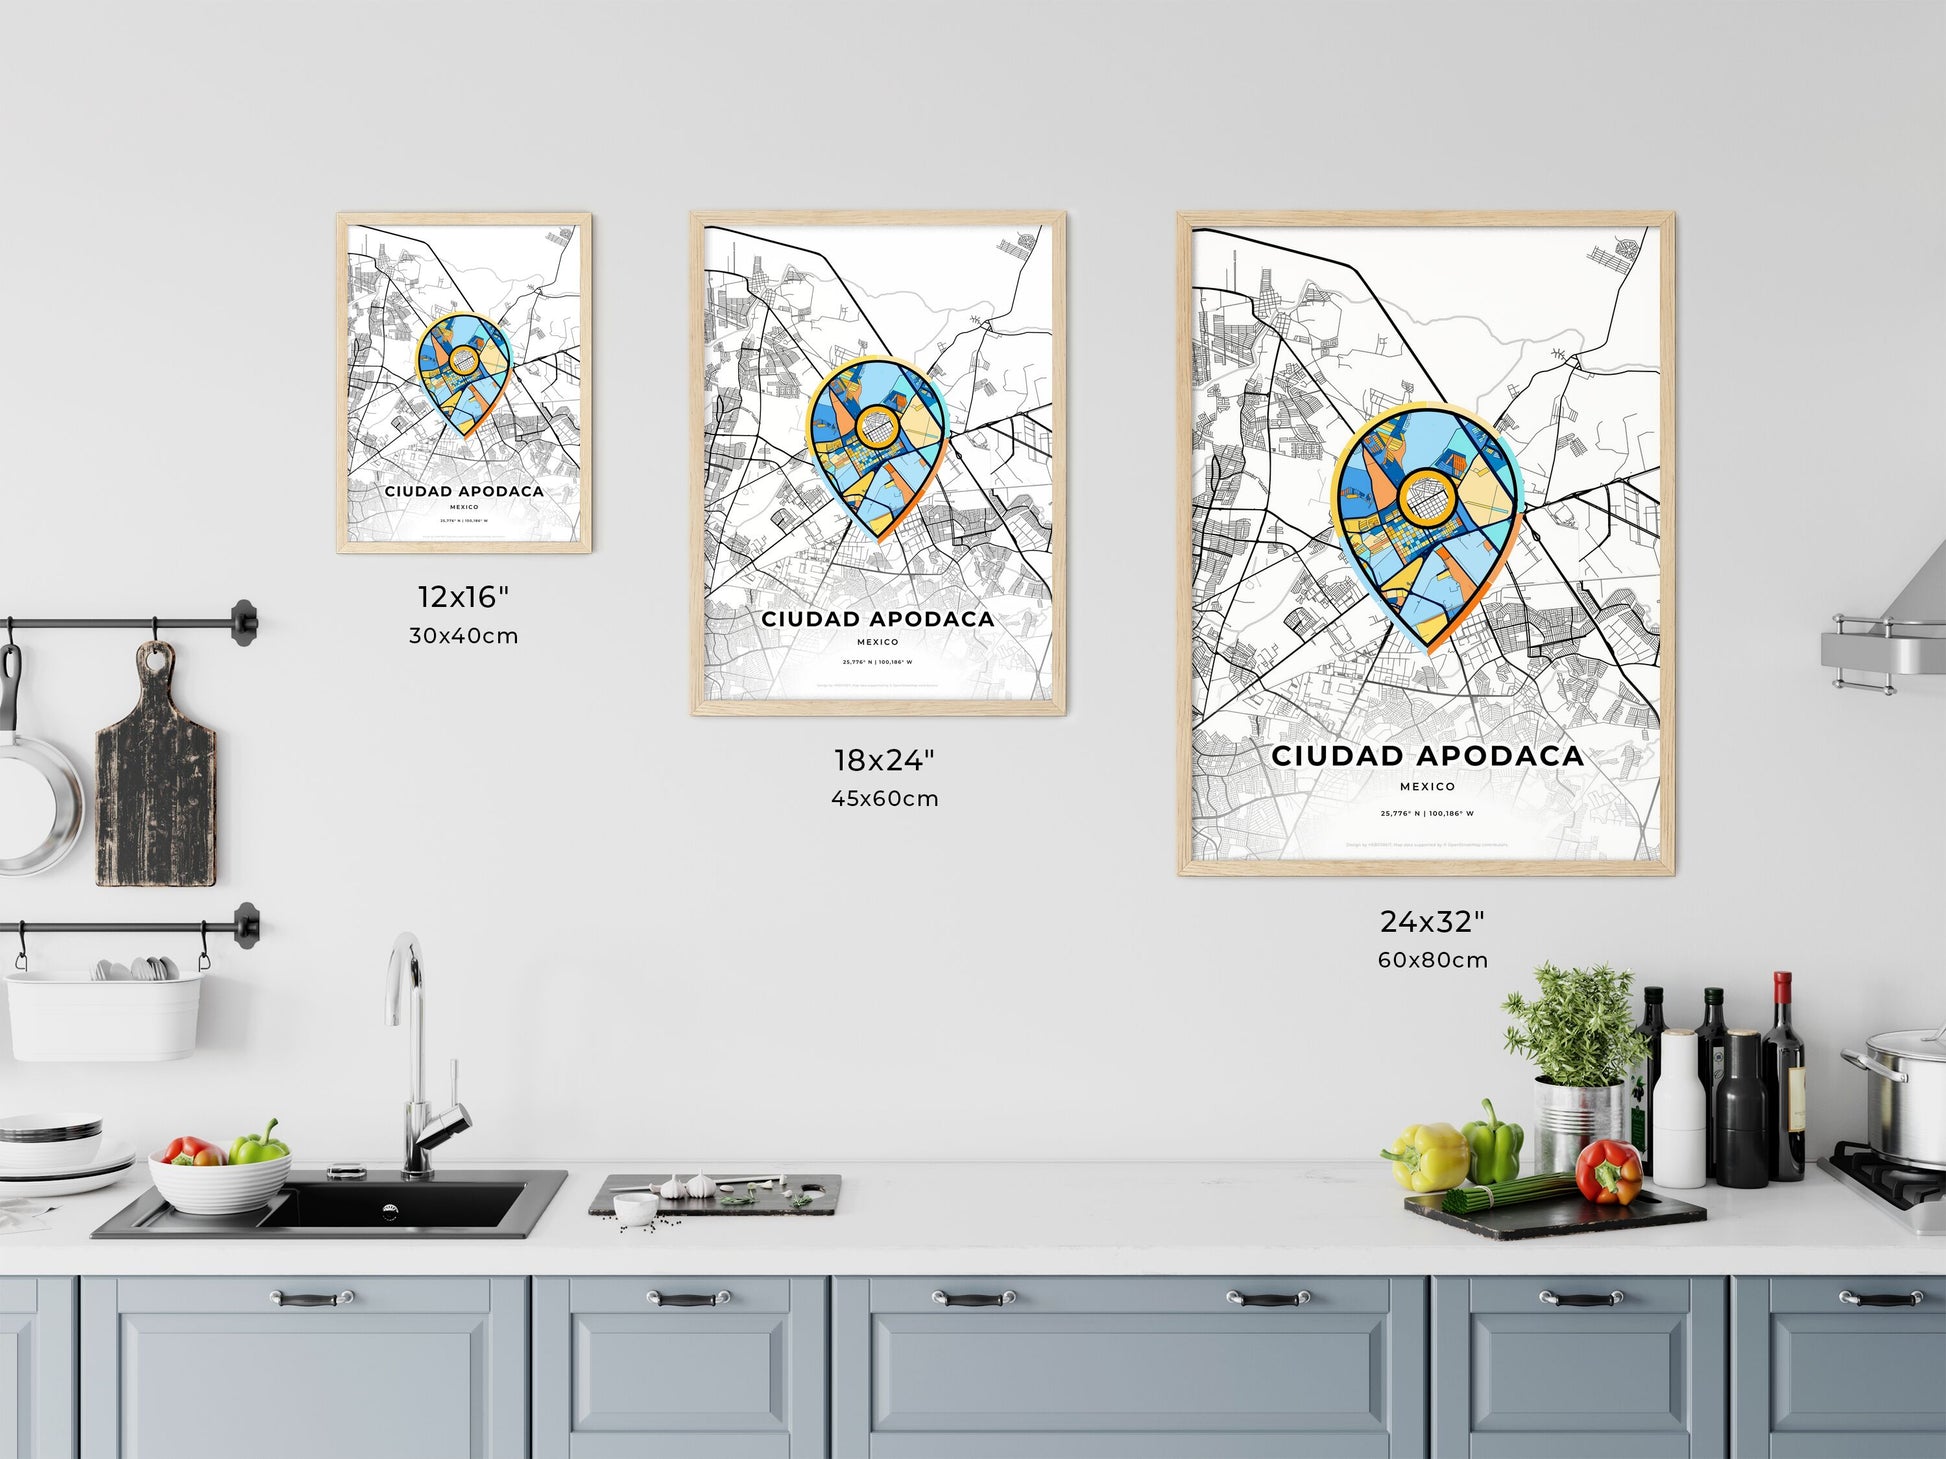 CIUDAD APODACA MEXICO minimal art map with a colorful icon. Where it all began, Couple map gift.